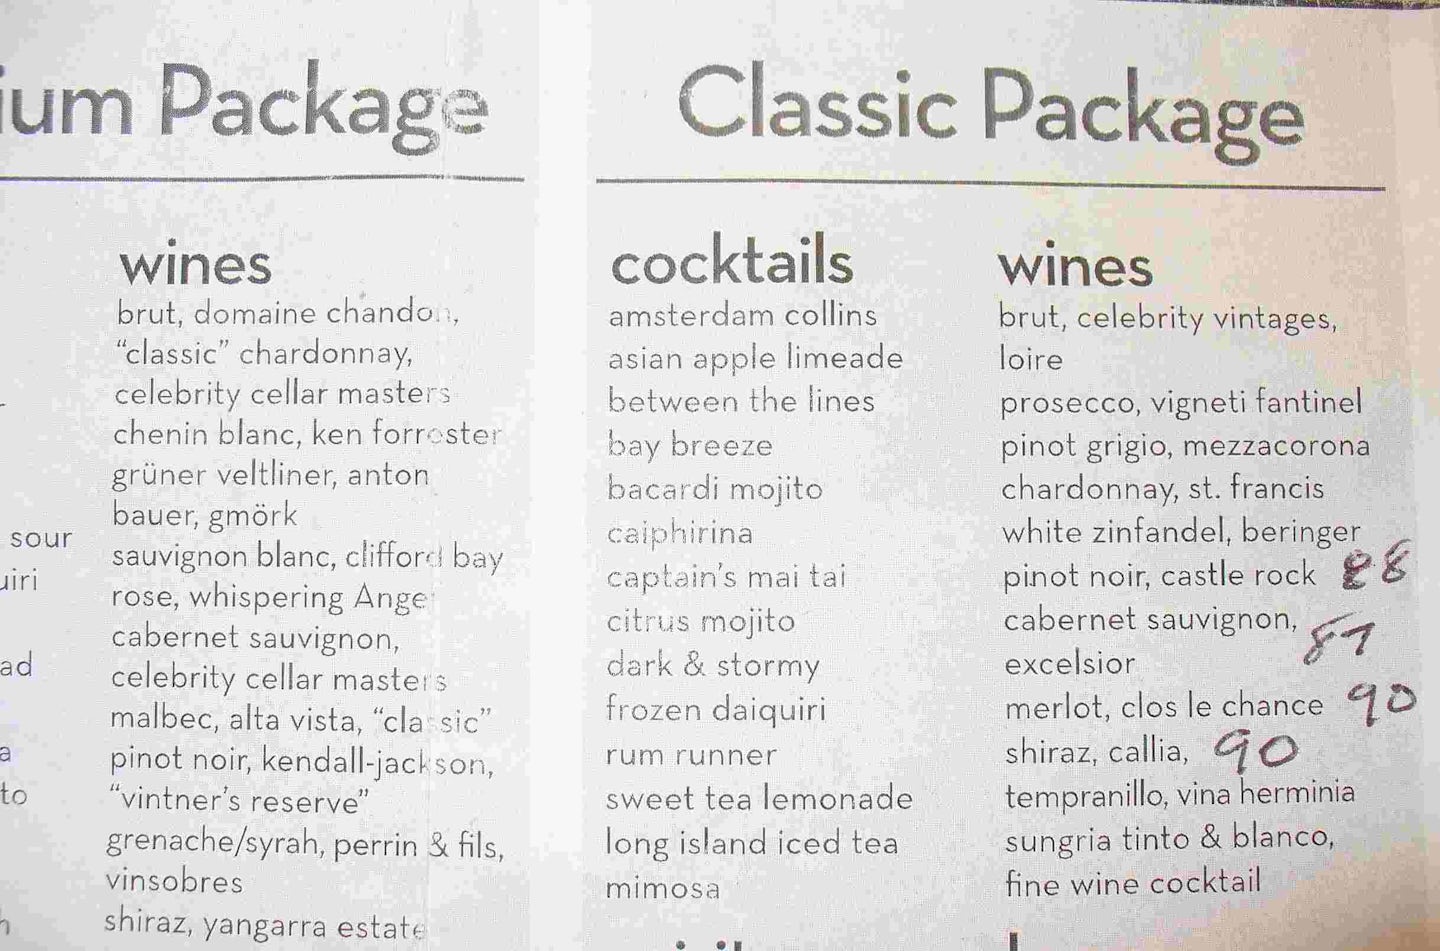 Drink packages ... see review for info on the accuracy of these lists.